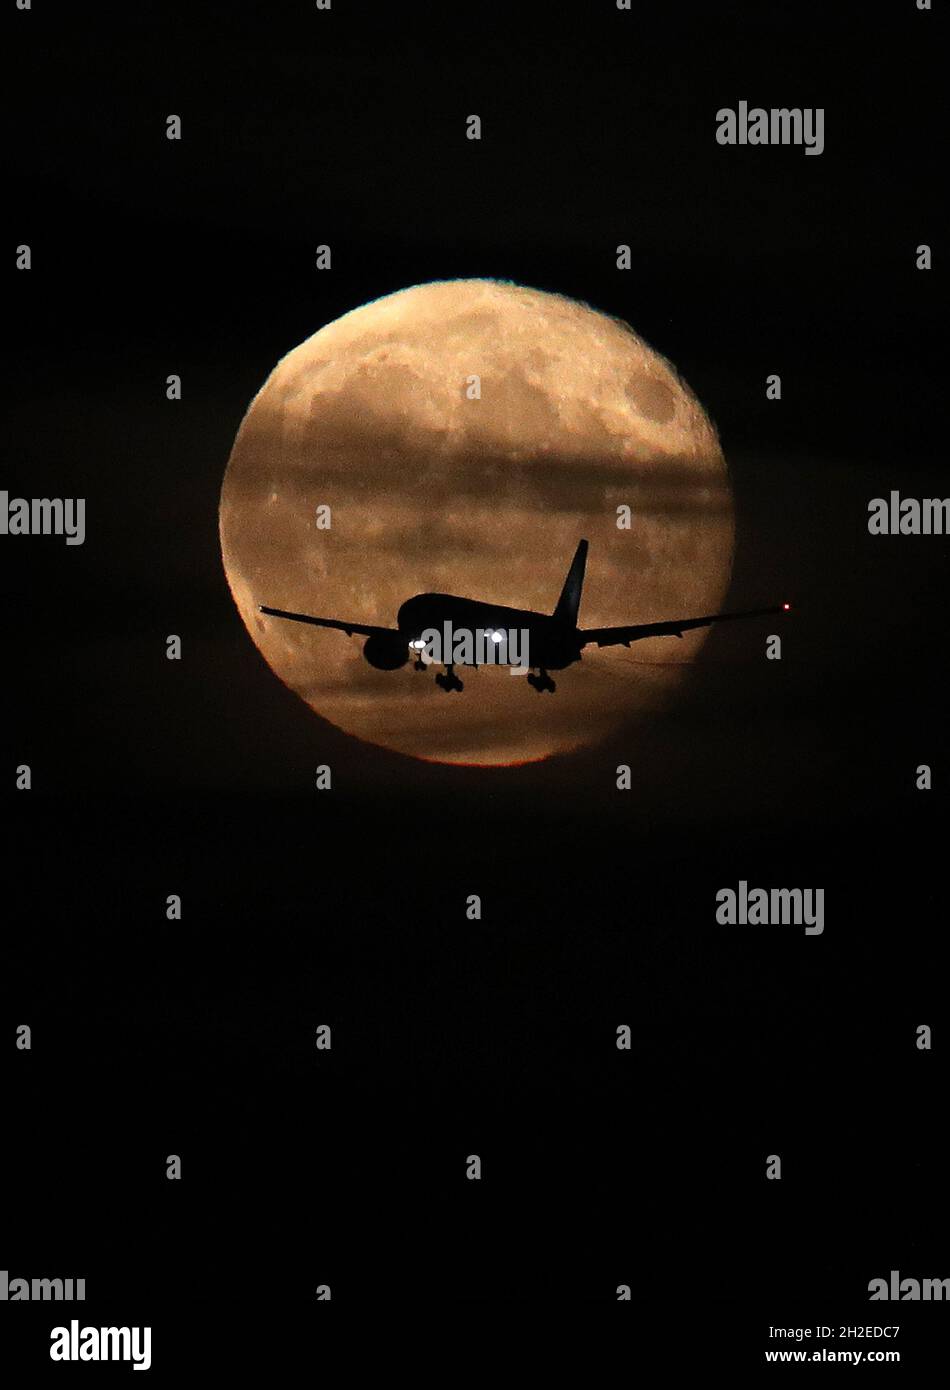 Castle Donington, Derbyshire, UK. 21st October 2021. UK weather.  A plane passes the waning gibbous moon as it makes its approach into East Midlands Airport. Credit Darren Staples/Alamy Live News. Stock Photo